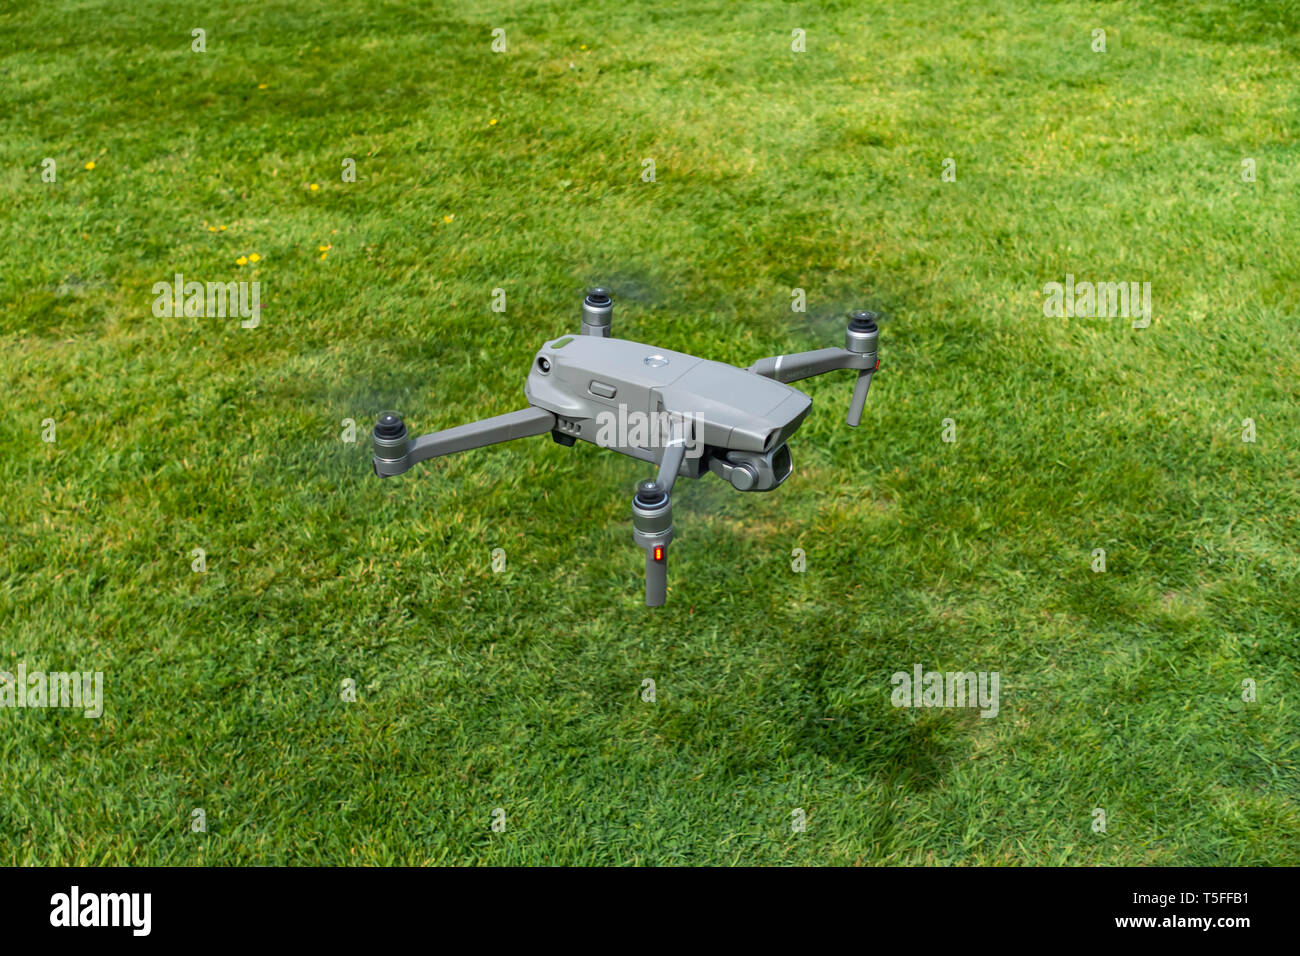 Birds eye view looking down onto a flying DJI Mavic 2 PRO personal Drone flying very low near to the ground Stock Photo